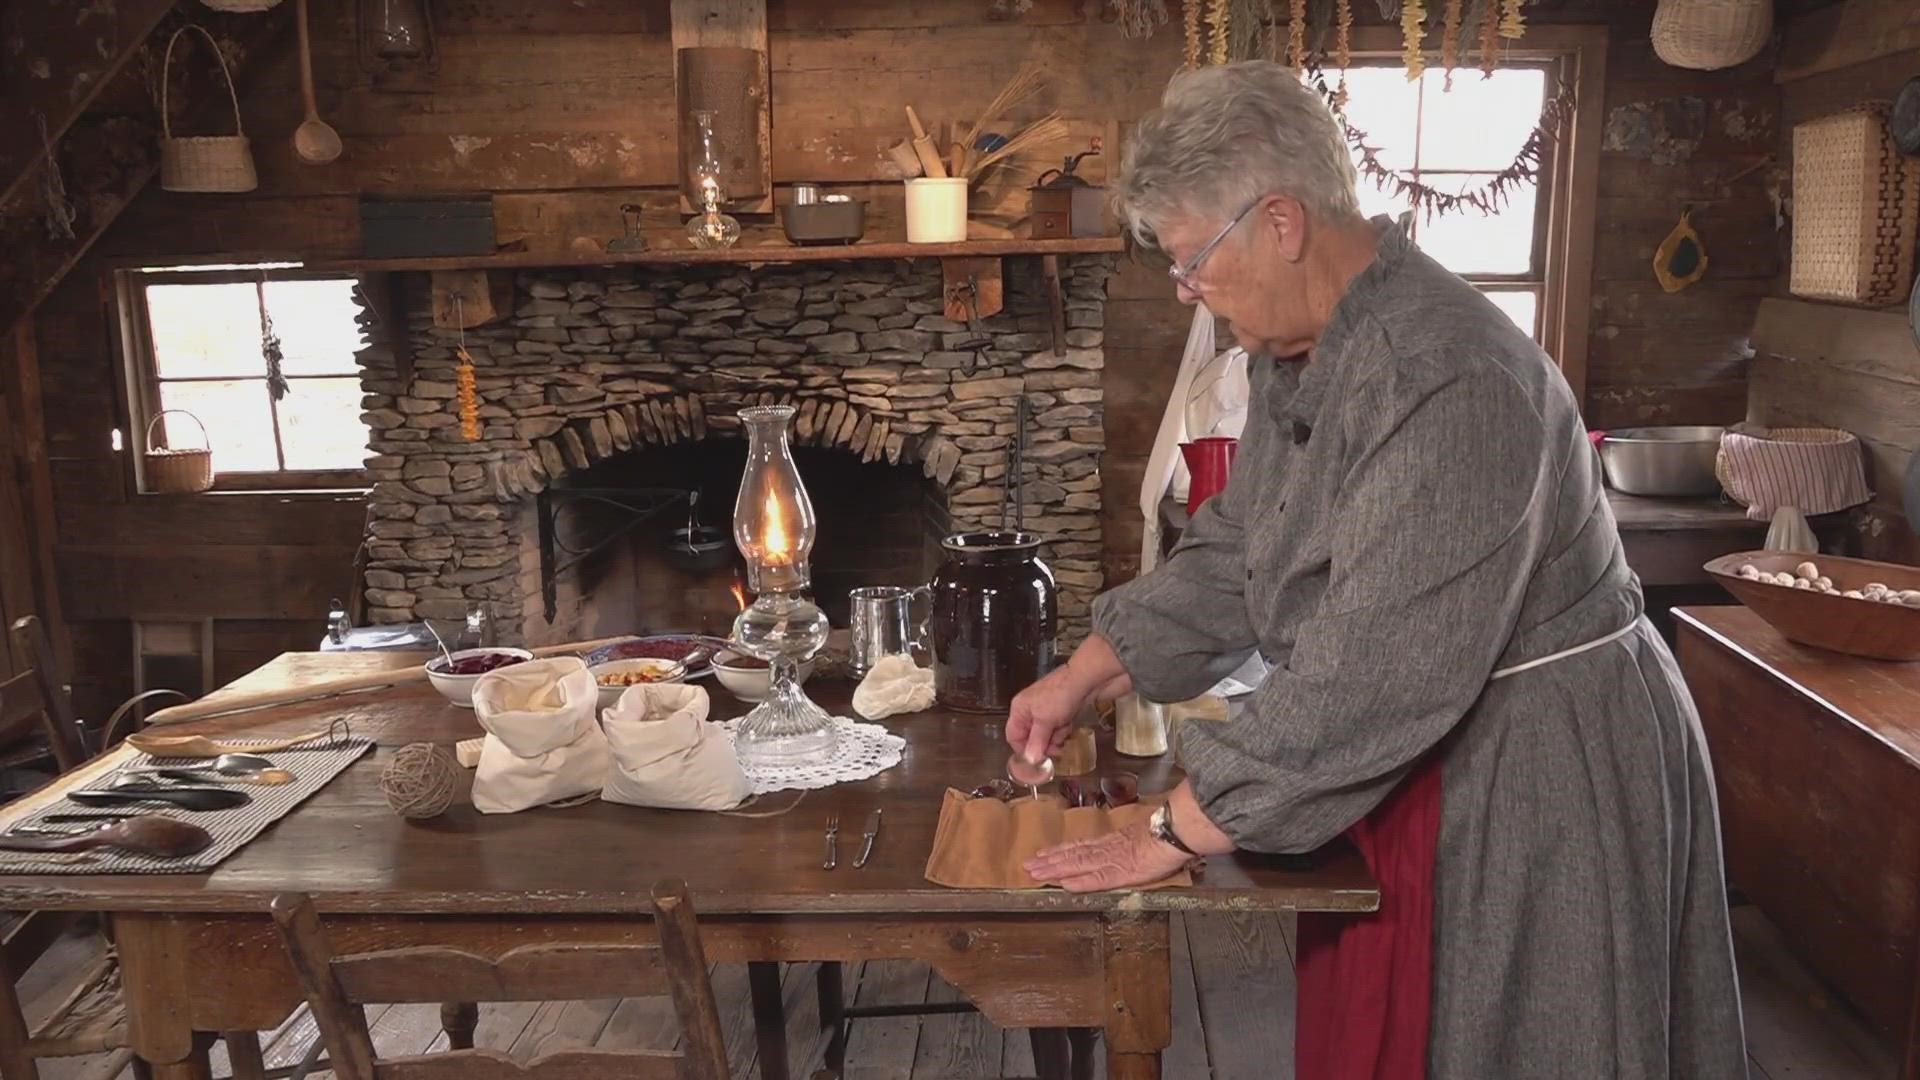 The Great Smoky Mountains Heritage Center will host a day of living history. The winter heritage festival is full of tours, cooking, crafts and storytelling.